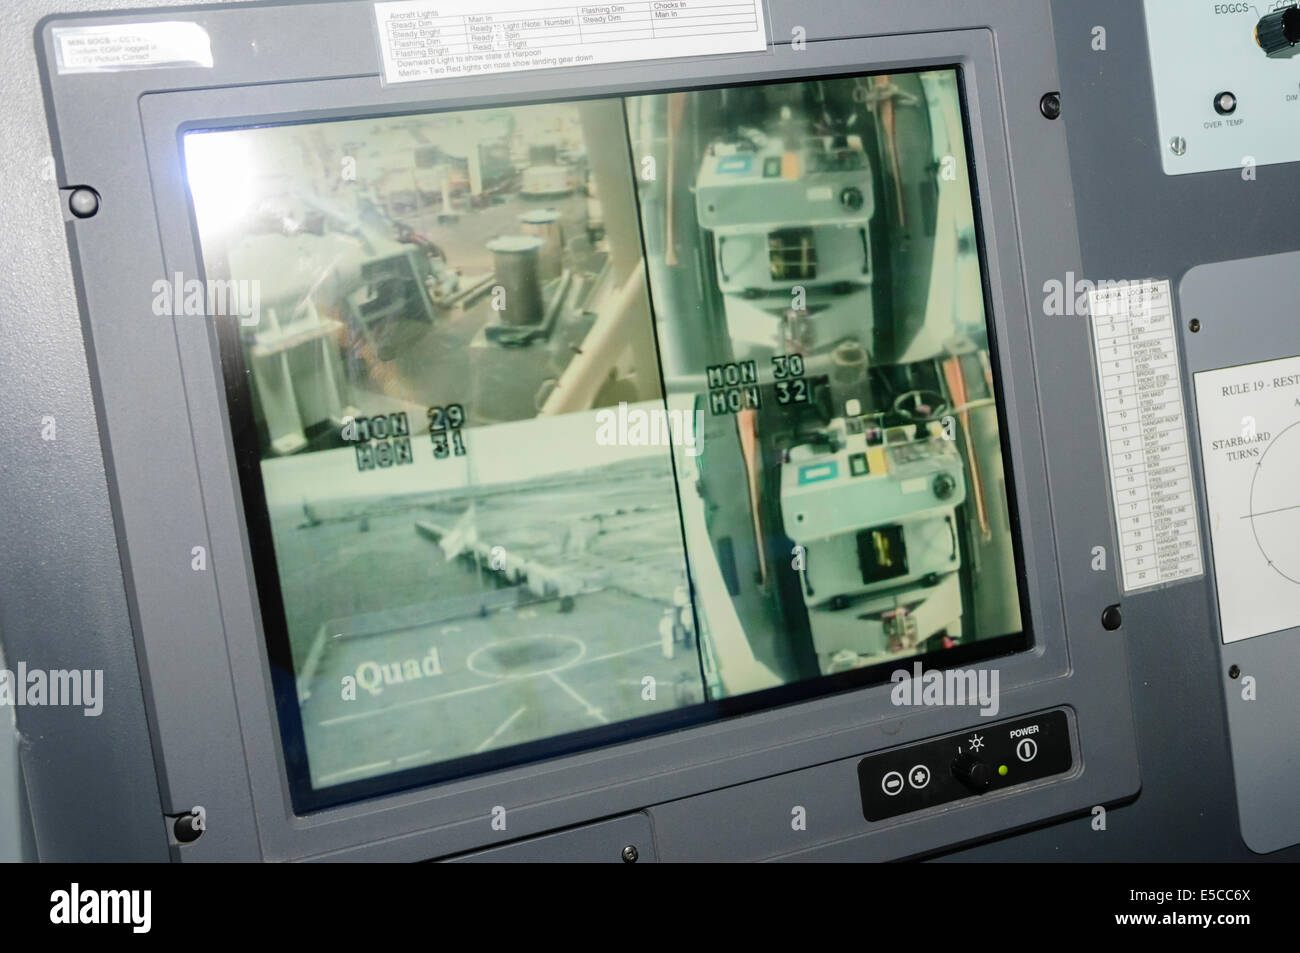 Belfast, Northern Ireland. 26/07/2014 - Monitors for cameras mounted around the Type 45 destroyer HMS Duncan Credit:  Stephen Barnes/Alamy Live News Stock Photo